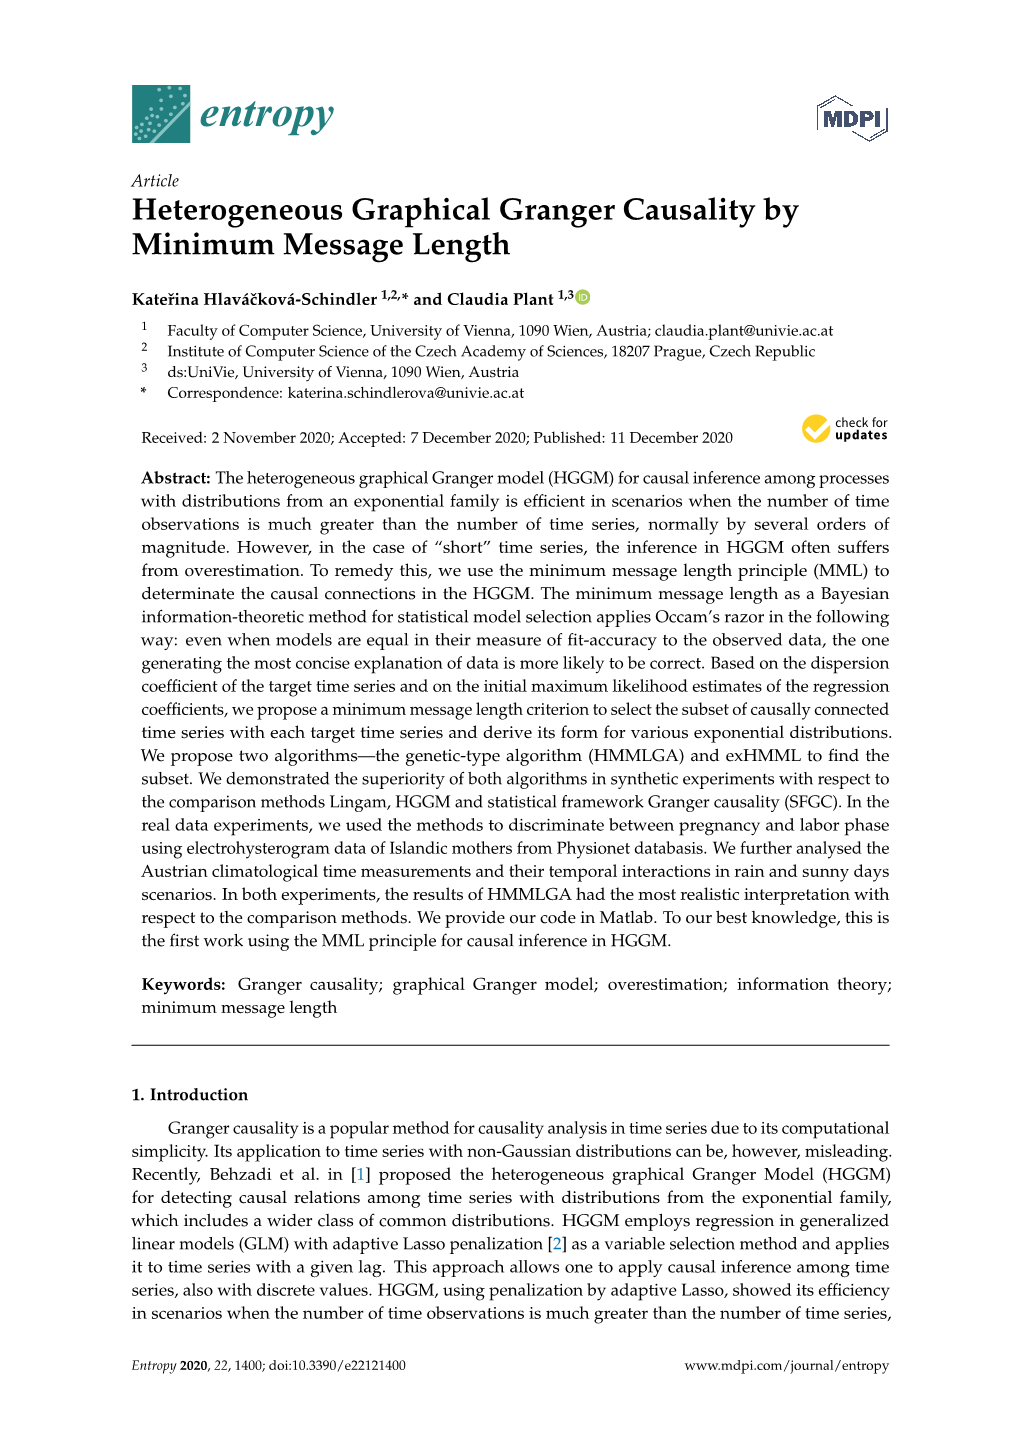 Heterogeneous Graphical Granger Causality by Minimum Message Length